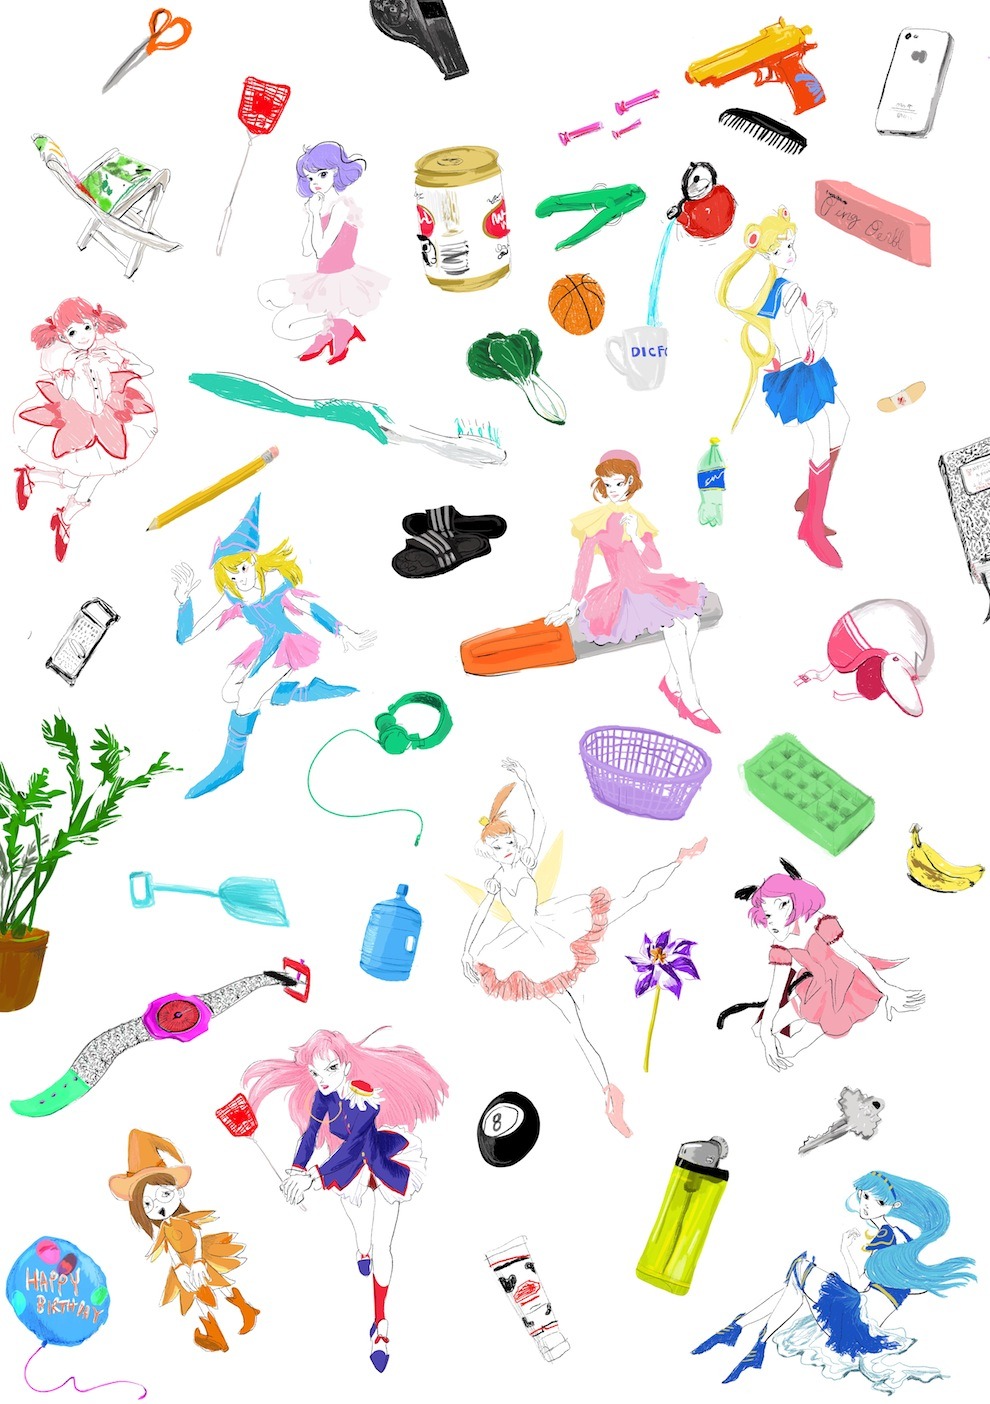 I did this pattern awhile ago, like last November and never uploaded it. The theme is “Magical Girls and Mundane Objects&#8221;!  It was really fun.  I pulled an all nighter to finish it and then my file crashed at like 5 or 6 in the morning lol blog: Drawplay